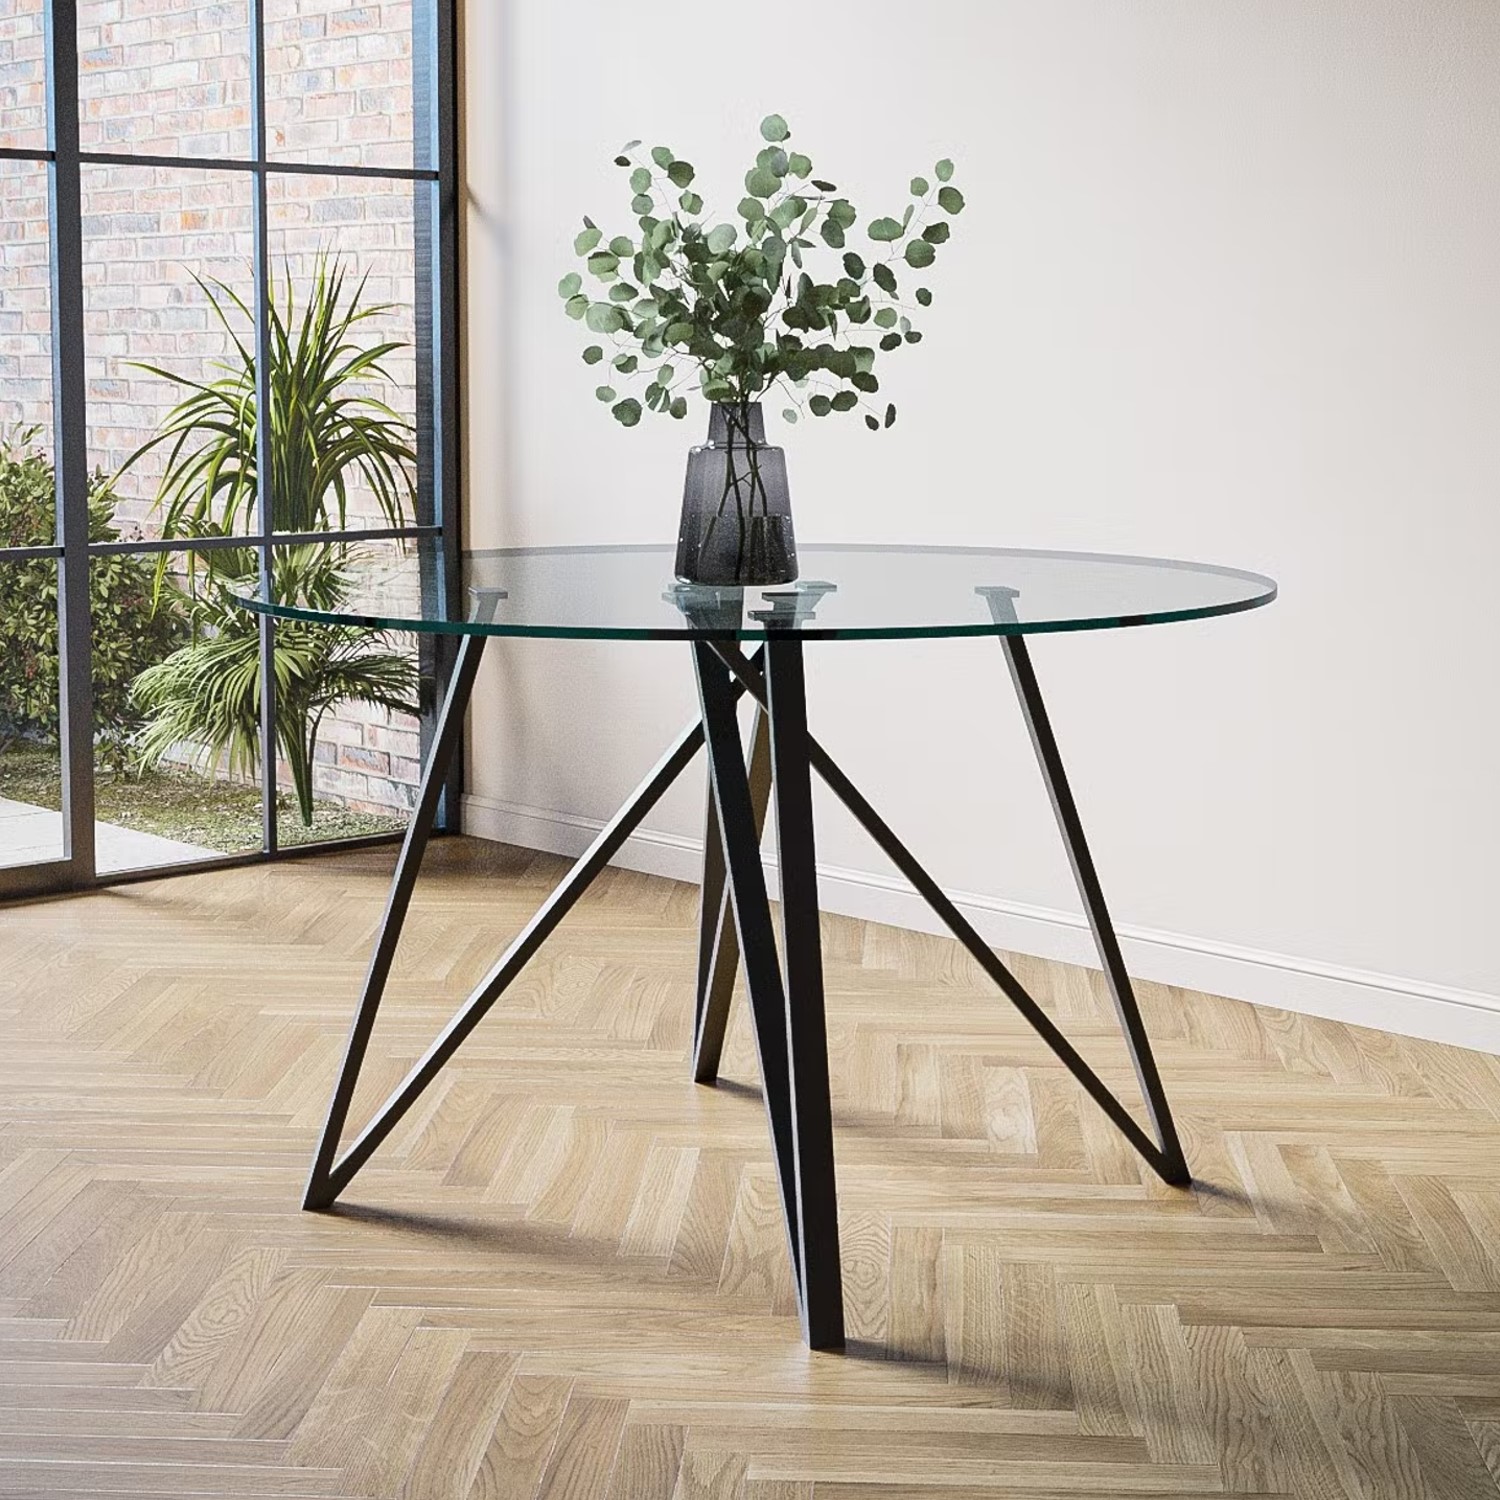 Photo of Round glass dining table with black legs - seats 4 - dax